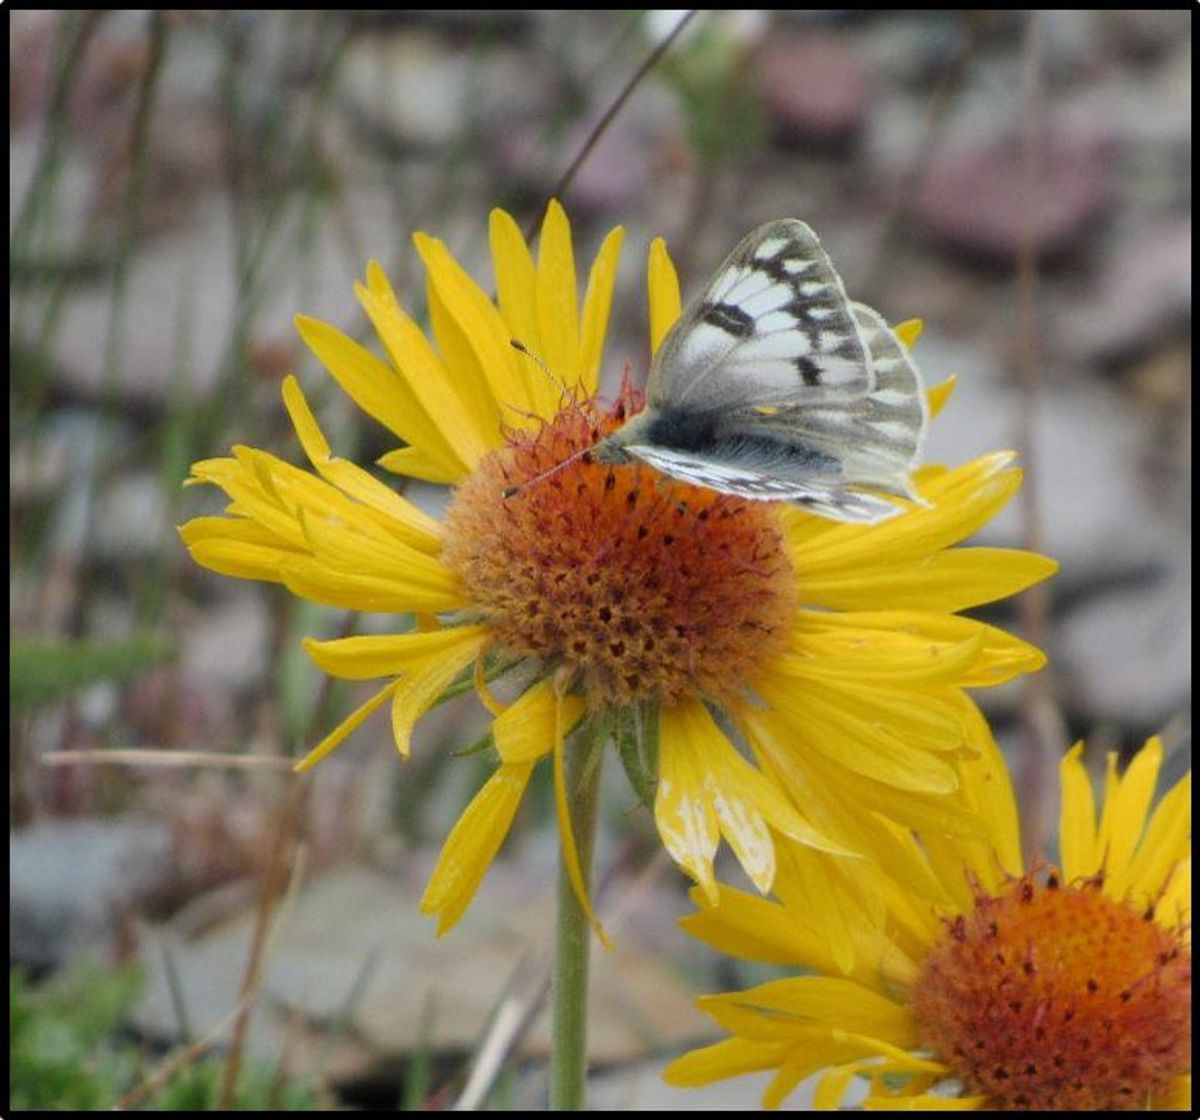 Pollinator Visitation Of Alpine Cushions And Their Beneficiary Species